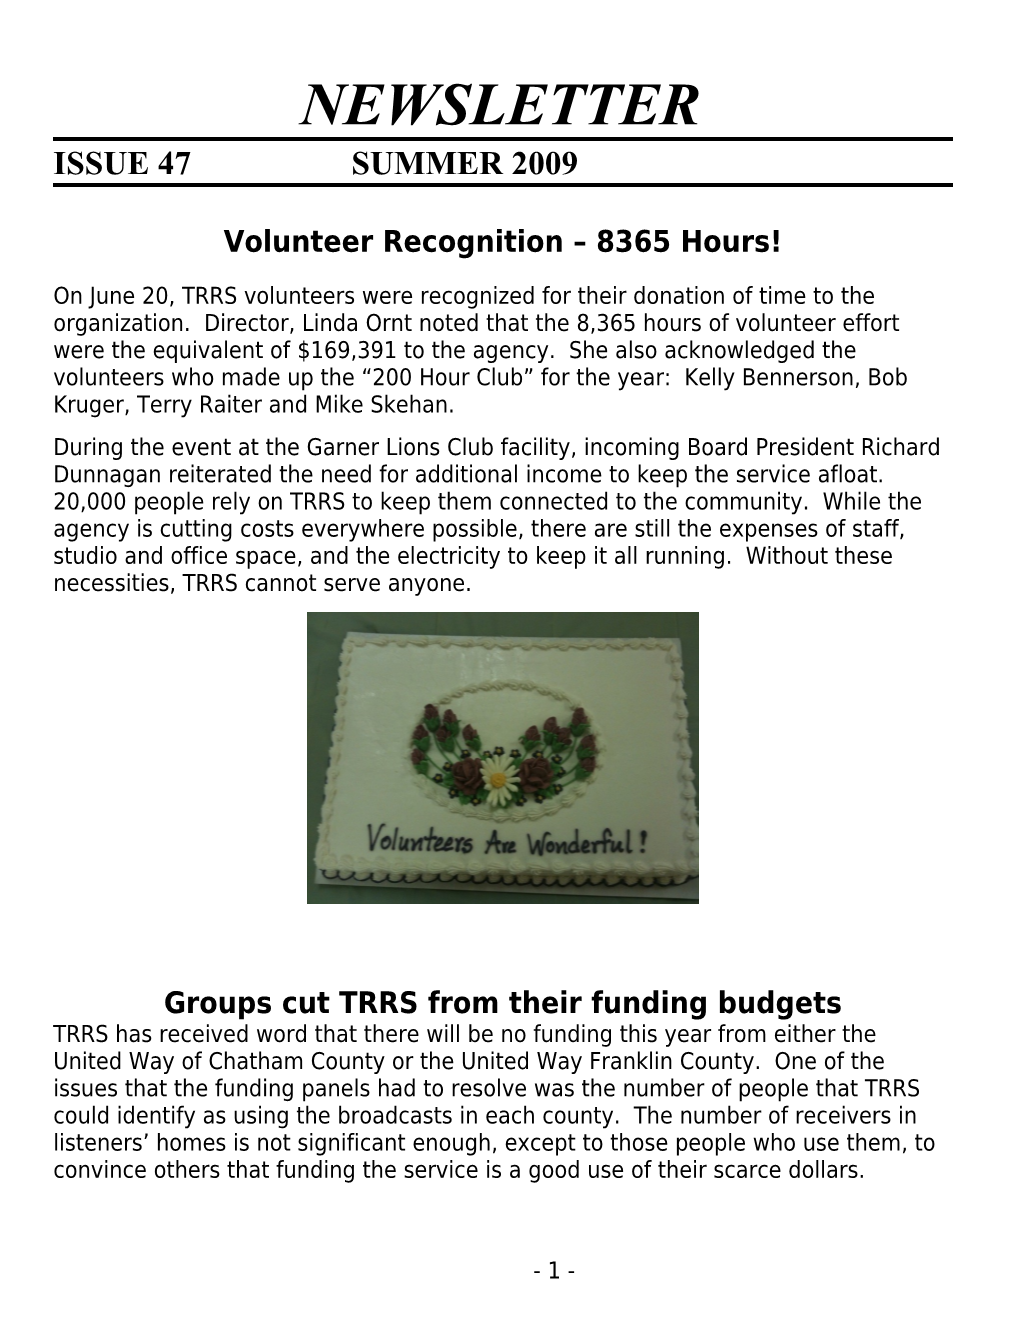 Groups Cut TRRS from Their Funding Budgets